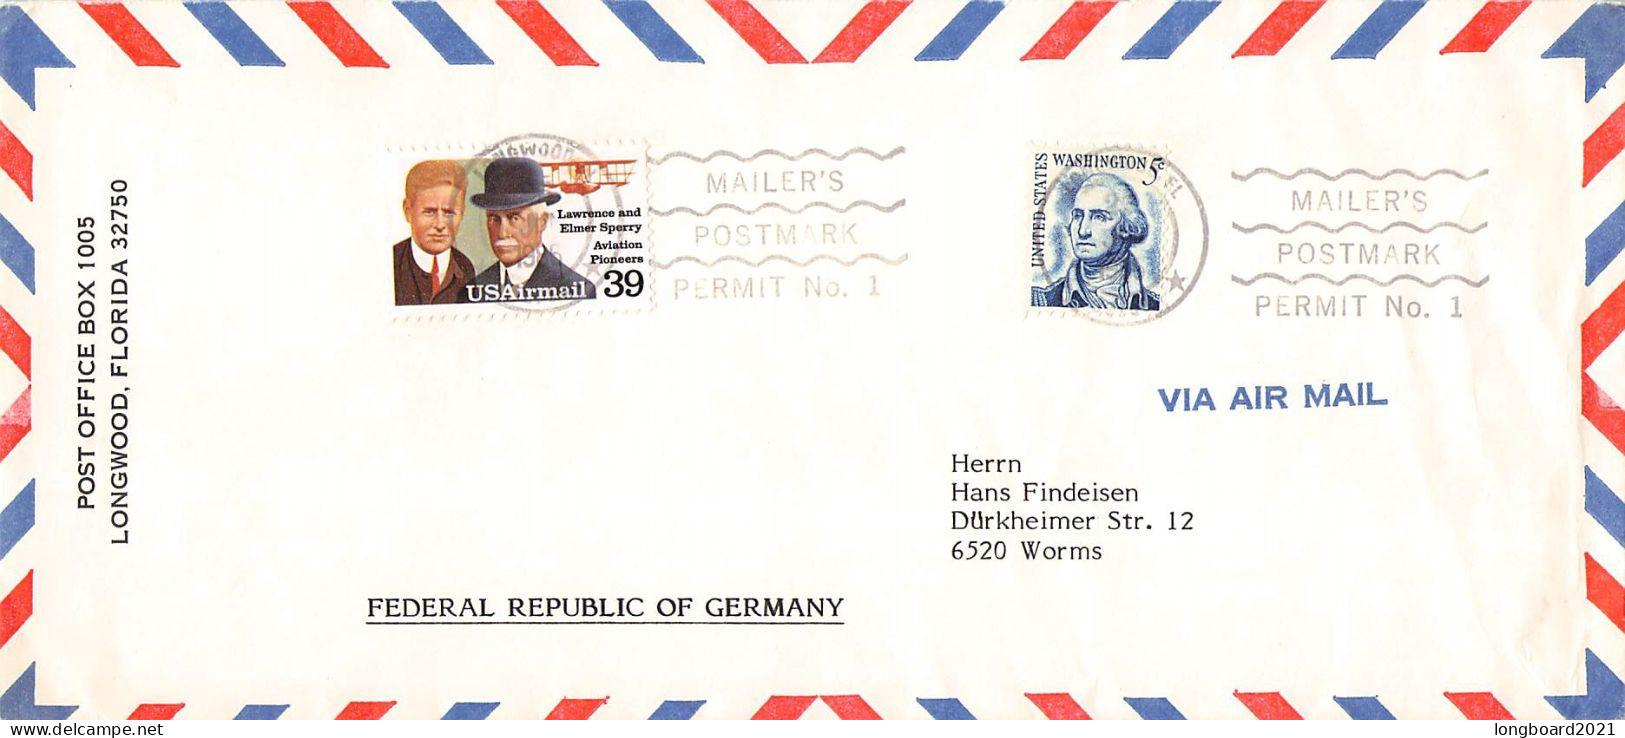 USA - COLLECTION MAIL & POSTAL STATIONERY / 6007